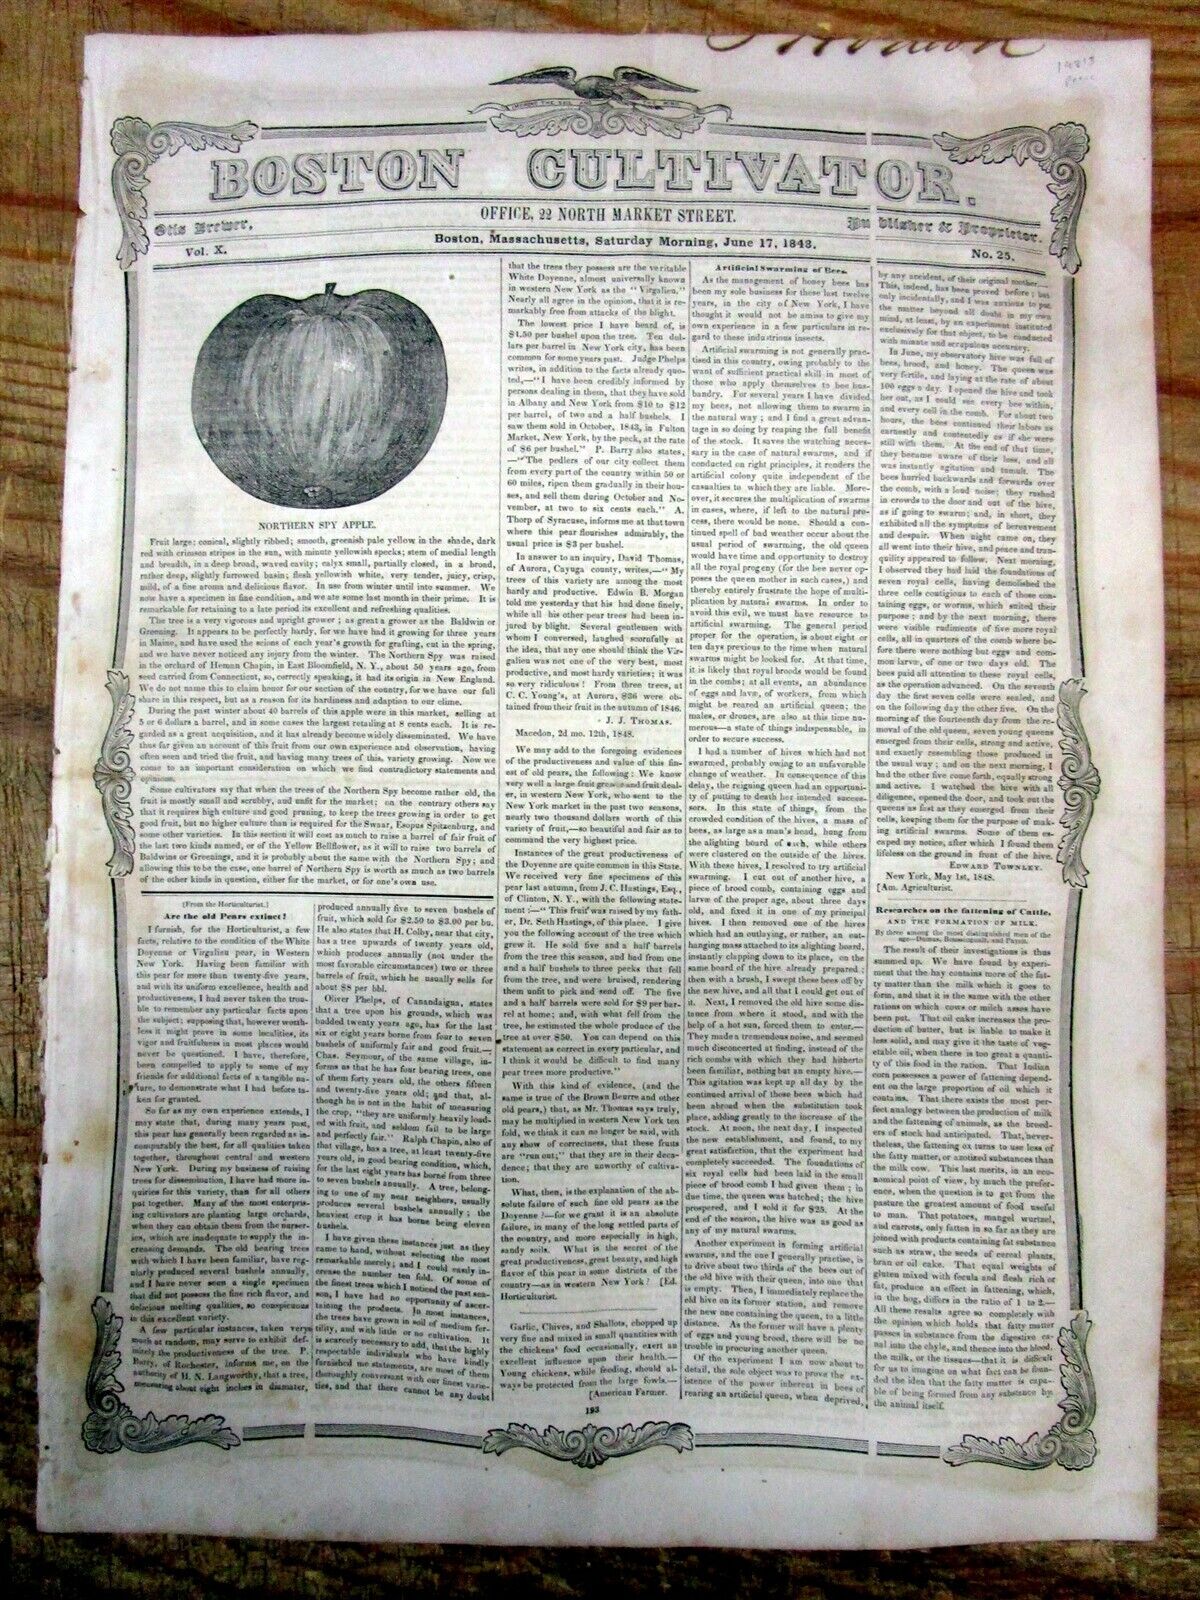 1848 newspaper THE MEXICAN-AMERICAN WAR ENDS as the PEACE TREATY is RATIFIED